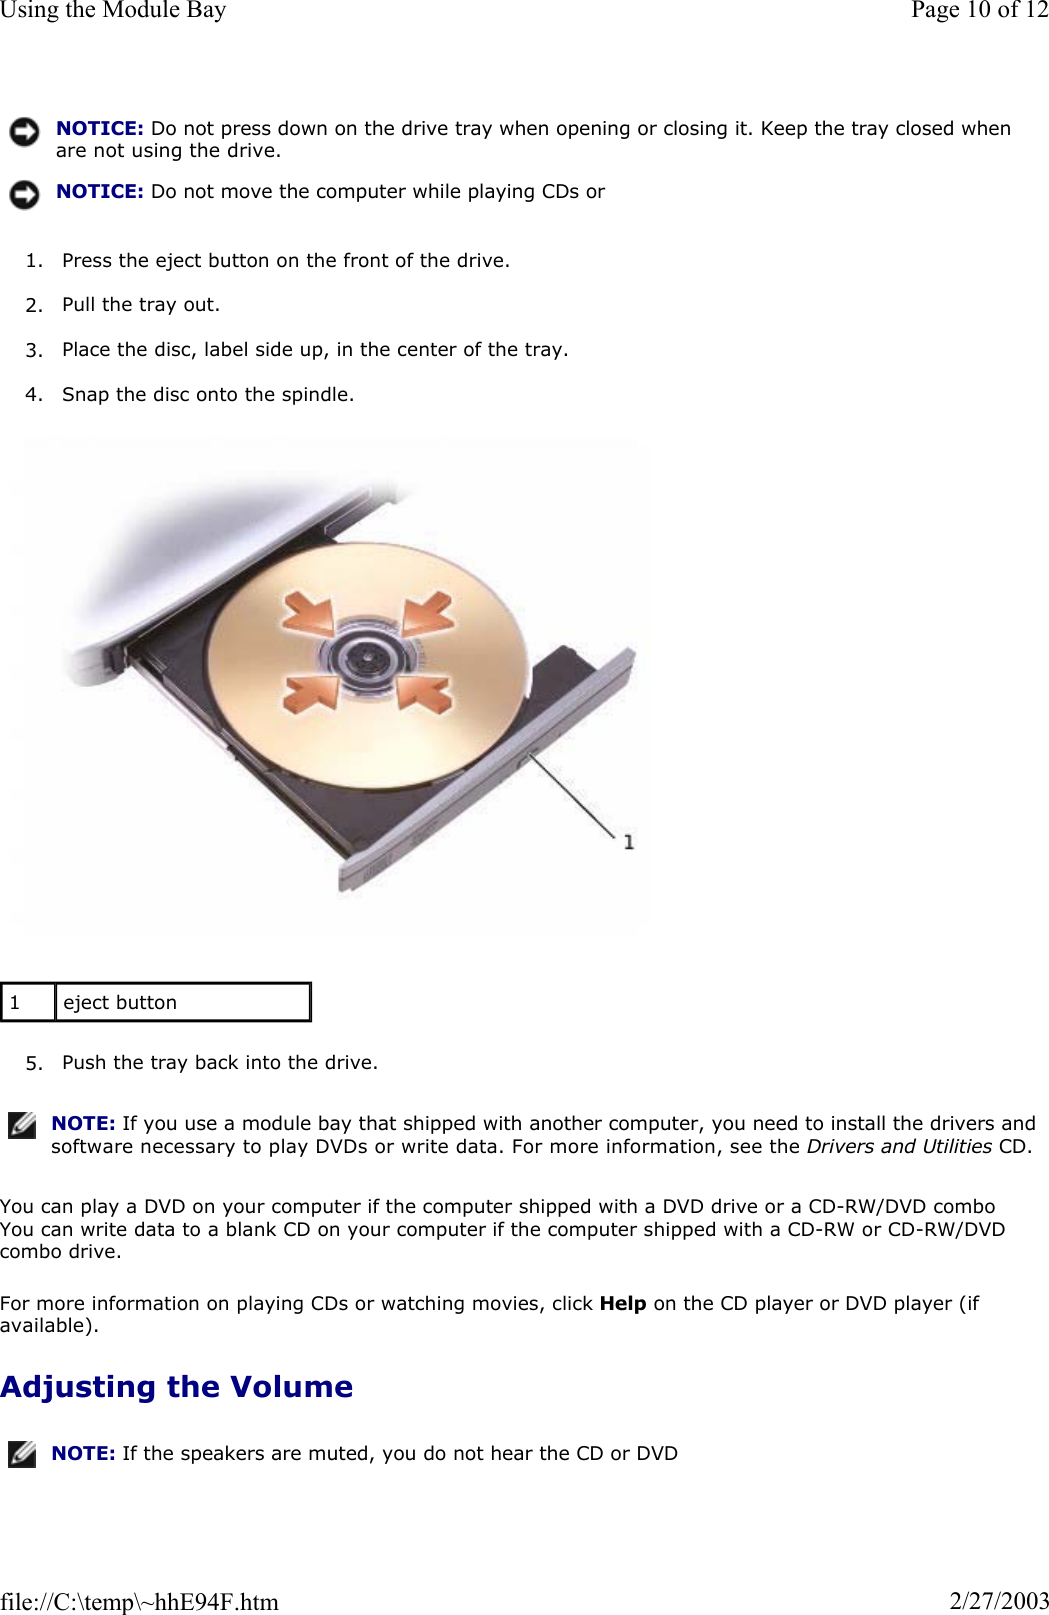 1. Press the eject button on the front of the drive. 2. Pull the tray out. 3. Place the disc, label side up, in the center of the tray. 4. Snap the disc onto the spindle. 5. Push the tray back into the drive. You can play a DVD on your computer if the computer shipped with a DVD drive or a CD-RW/DVD combo You can write data to a blank CD on your computer if the computer shipped with a CD-RW or CD-RW/DVD combo drive. For more information on playing CDs or watching movies, click Help on the CD player or DVD player (if available).Adjusting the Volume NOTICE: Do not press down on the drive tray when opening or closing it. Keep the tray closed when are not using the drive.NOTICE: Do not move the computer while playing CDs or 1eject button NOTE: If you use a module bay that shipped with another computer, you need to install the drivers and software necessary to play DVDs or write data. For more information, see the Drivers and Utilities CD.NOTE: If the speakers are muted, you do not hear the CD or DVD Page 10 of 12Using the Module Bay2/27/2003file://C:\temp\~hhE94F.htm